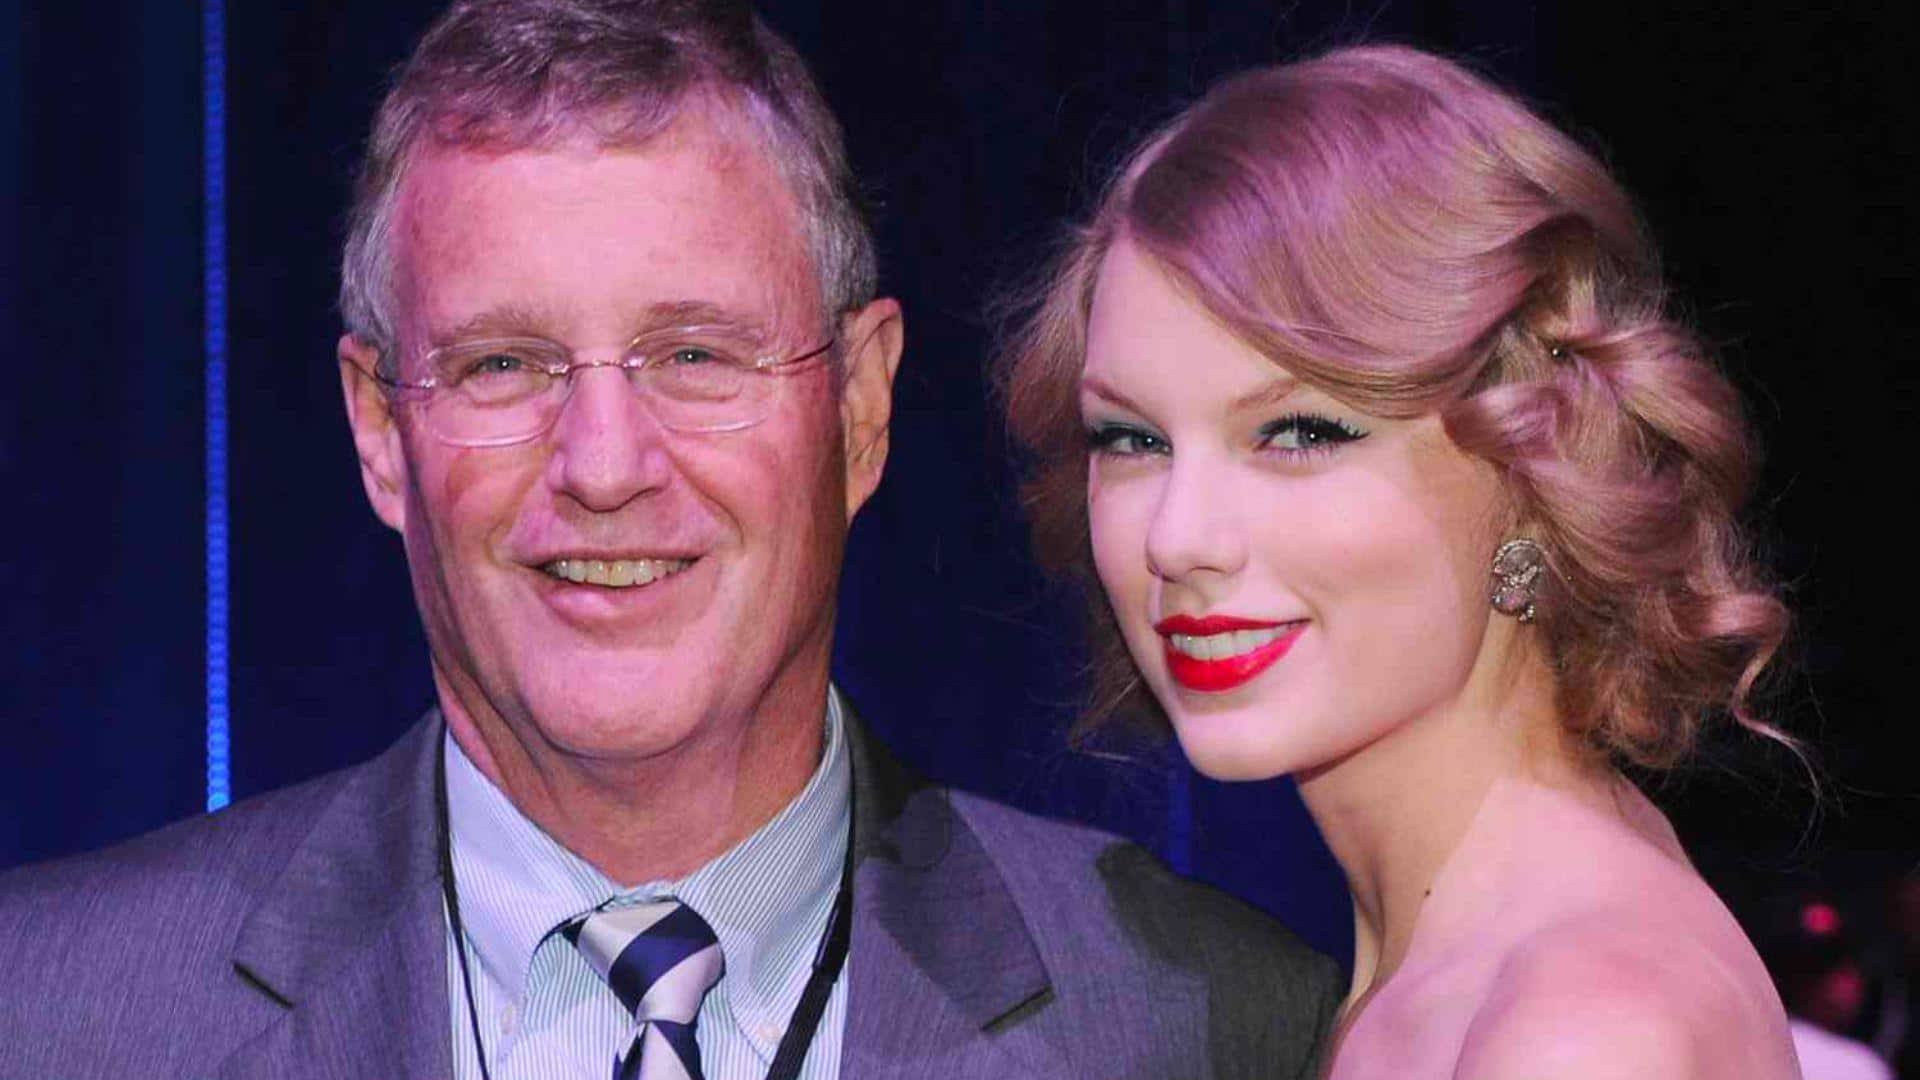 Taylor Swift's father allegedly punched Australian photographer: Report